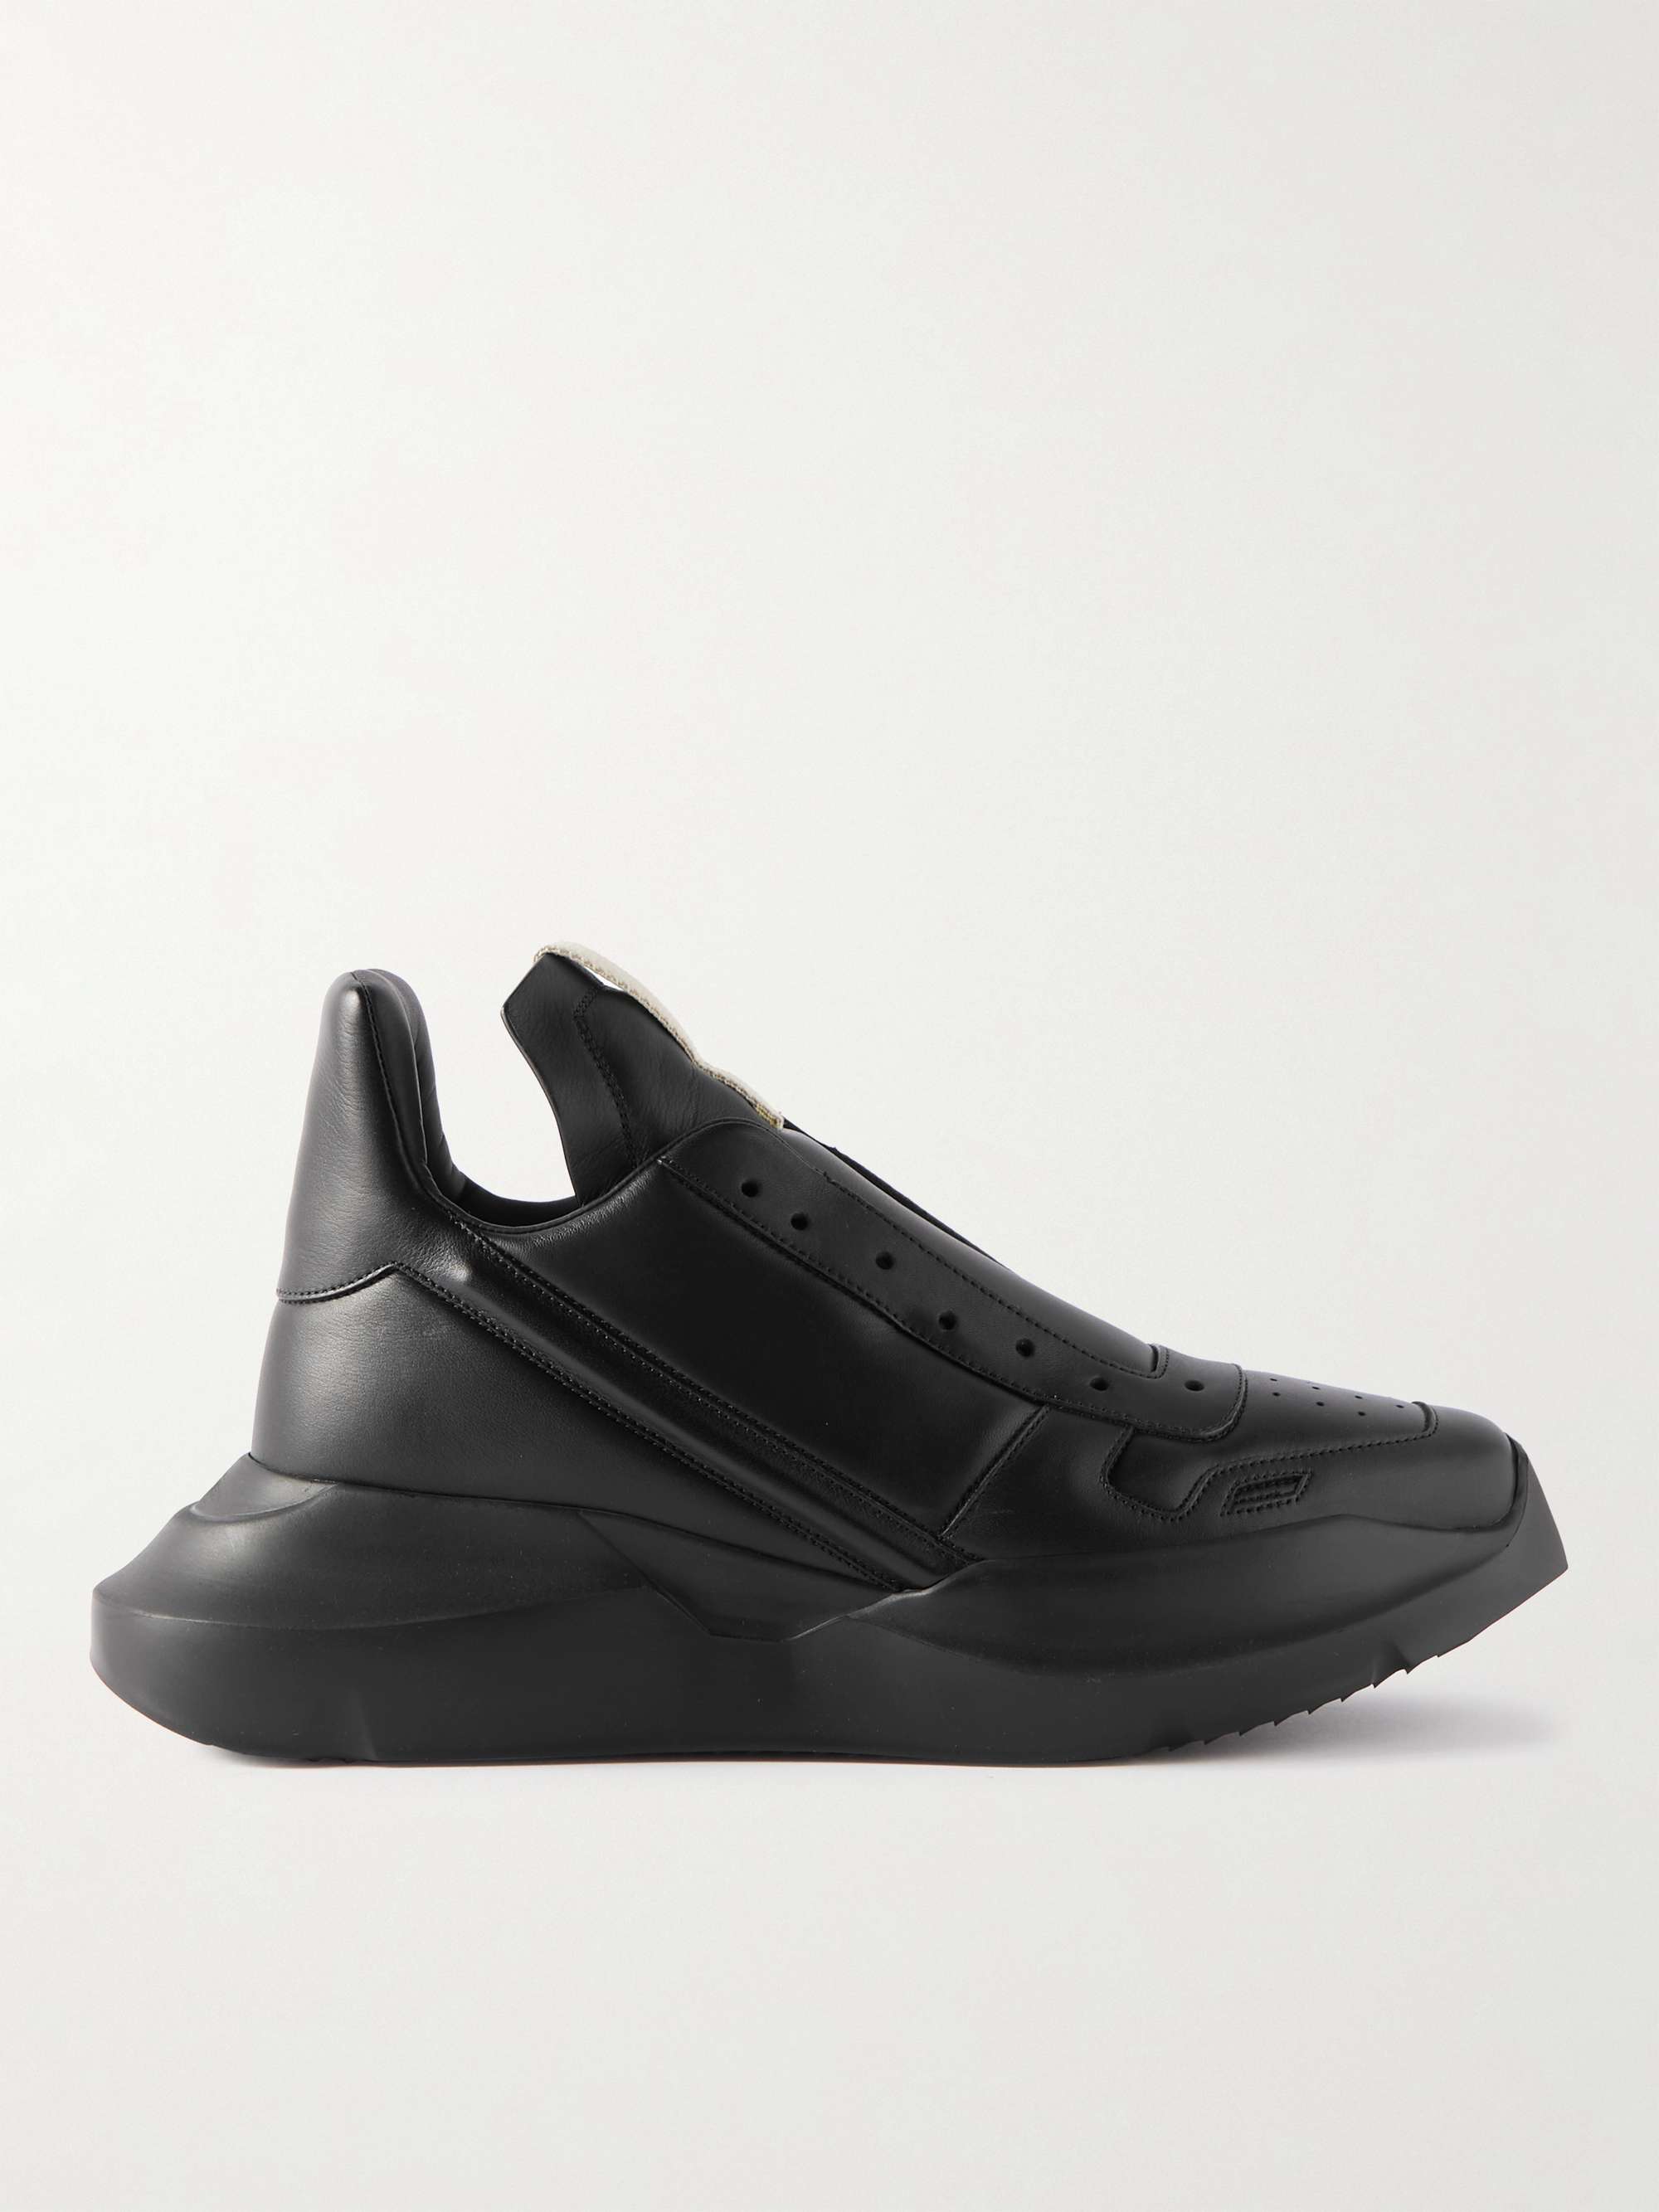 Rick Owens Shoes True Size, Rick Owens Inspired Sneakers